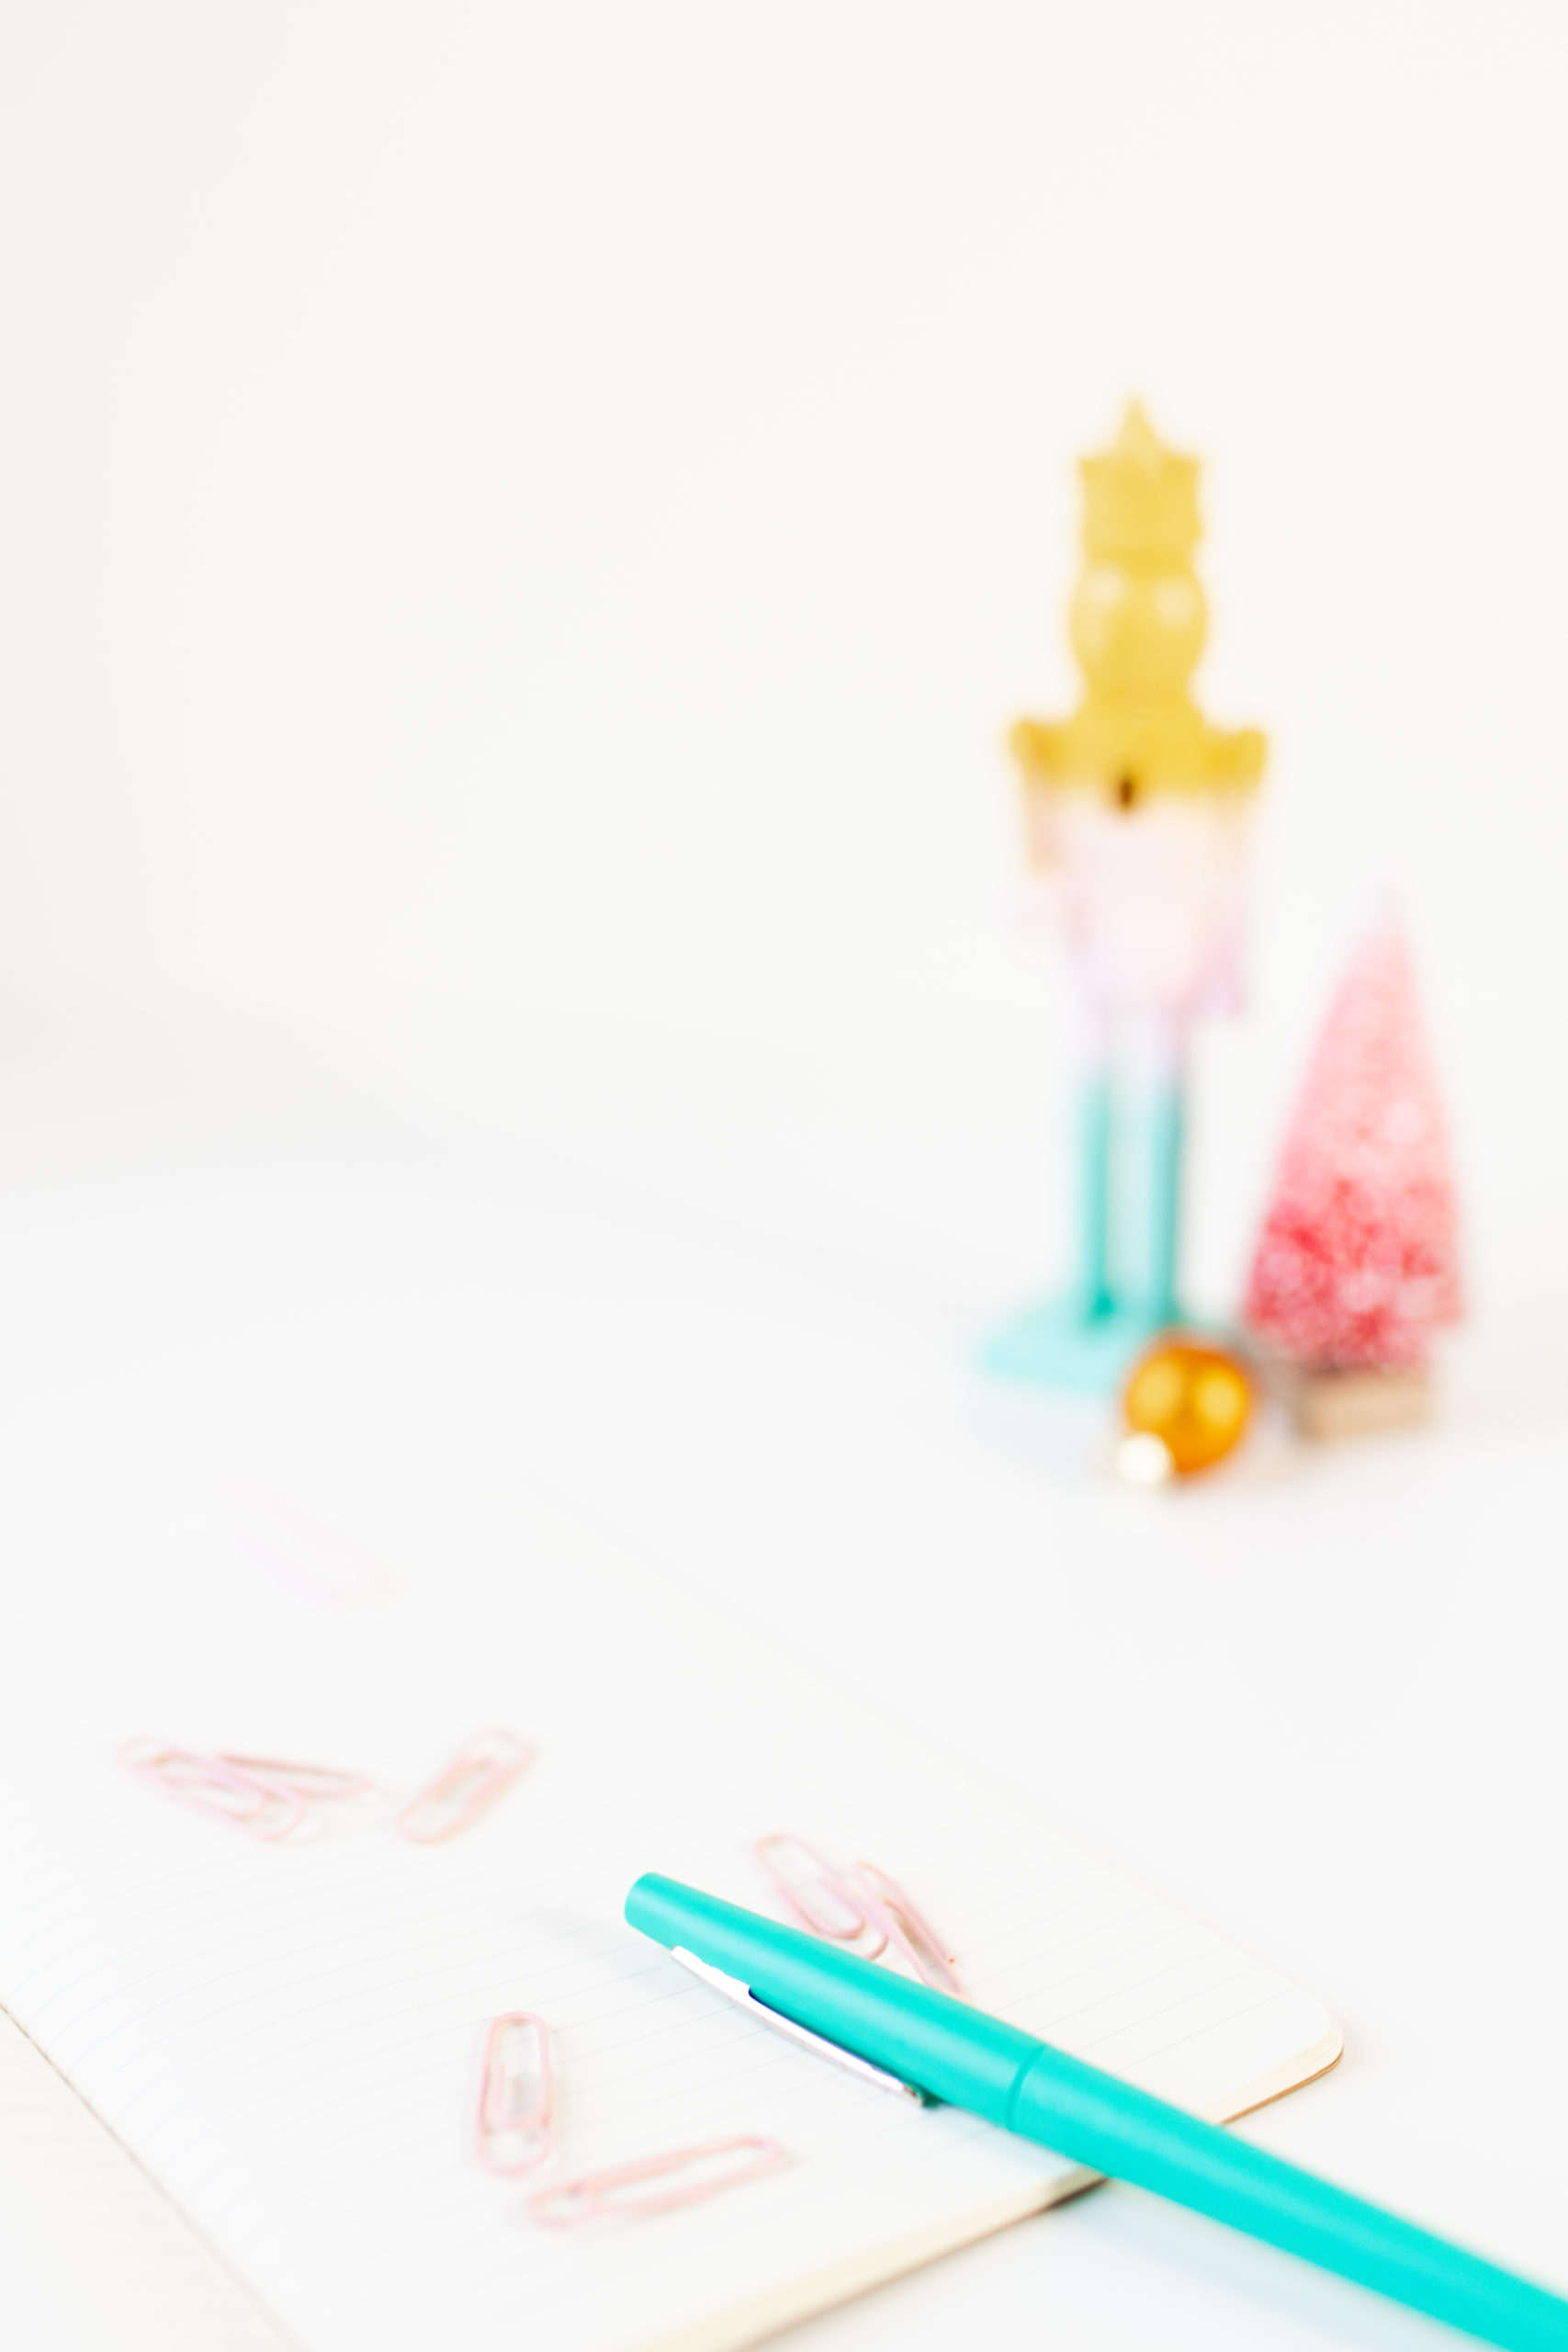 notepad and paper clips in the foreground with a colorful nutcracker in the background